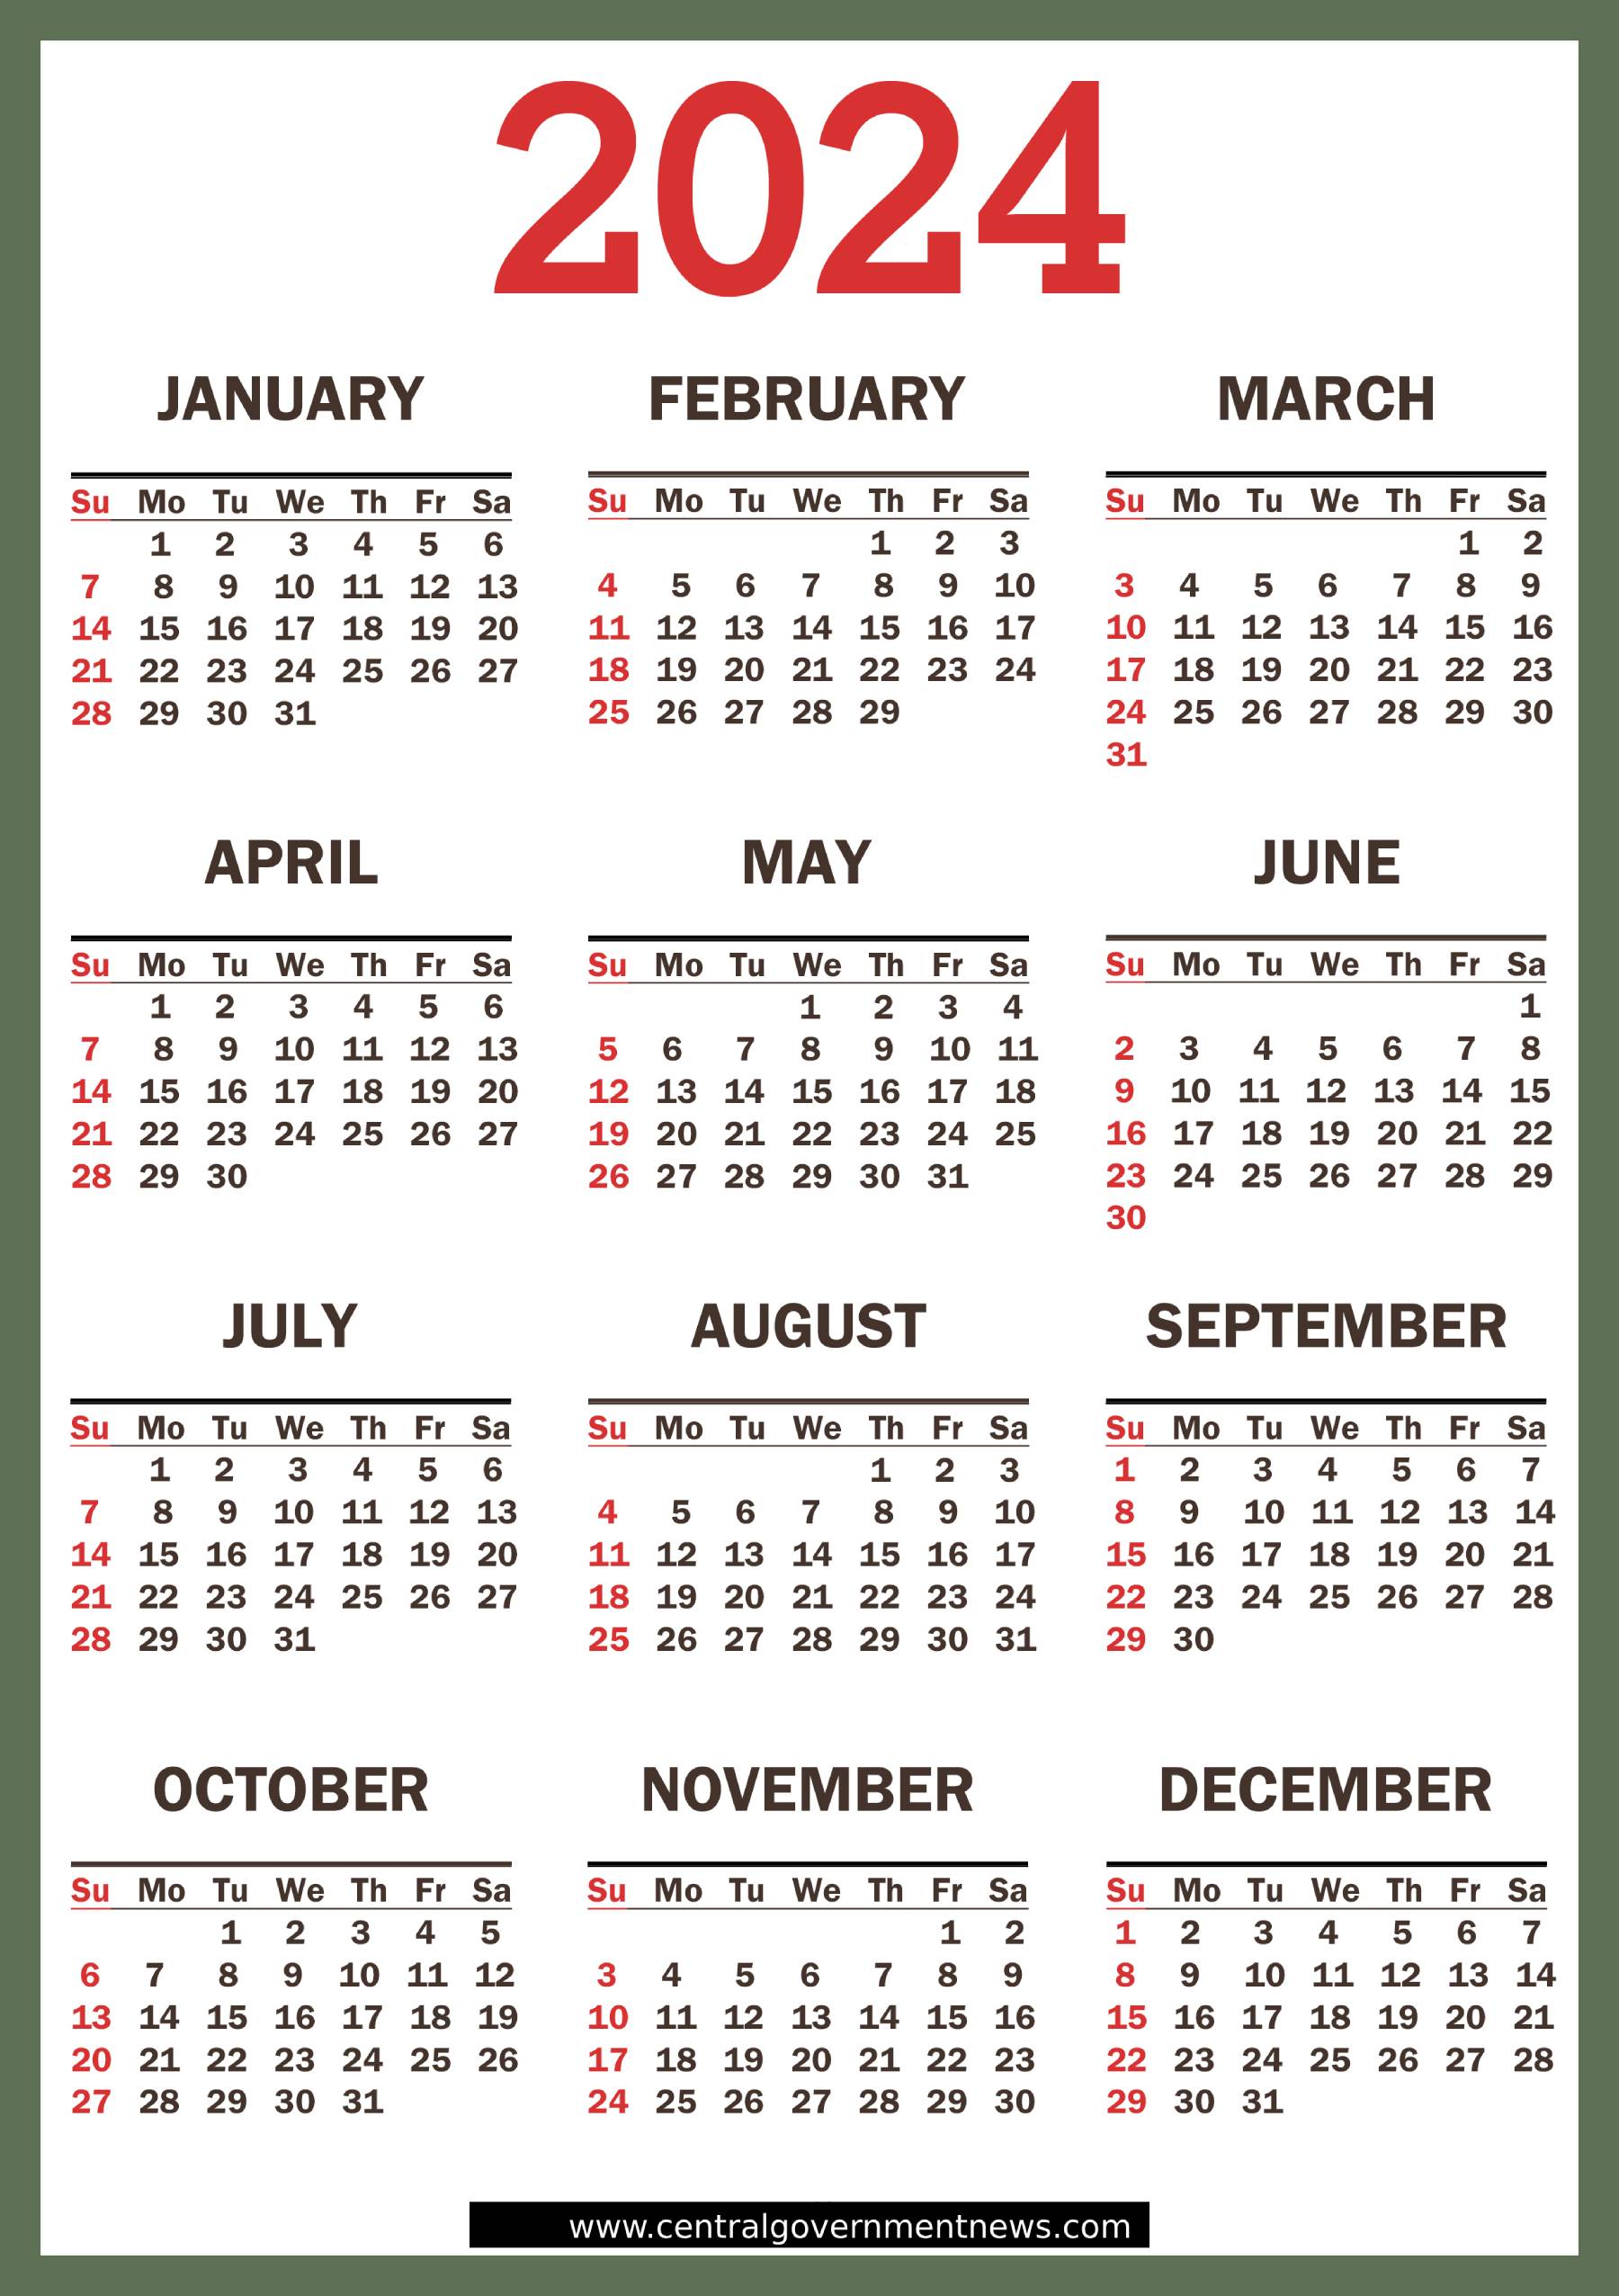 central-government-holiday-calendar-in-india-2024-central-government-employees-news